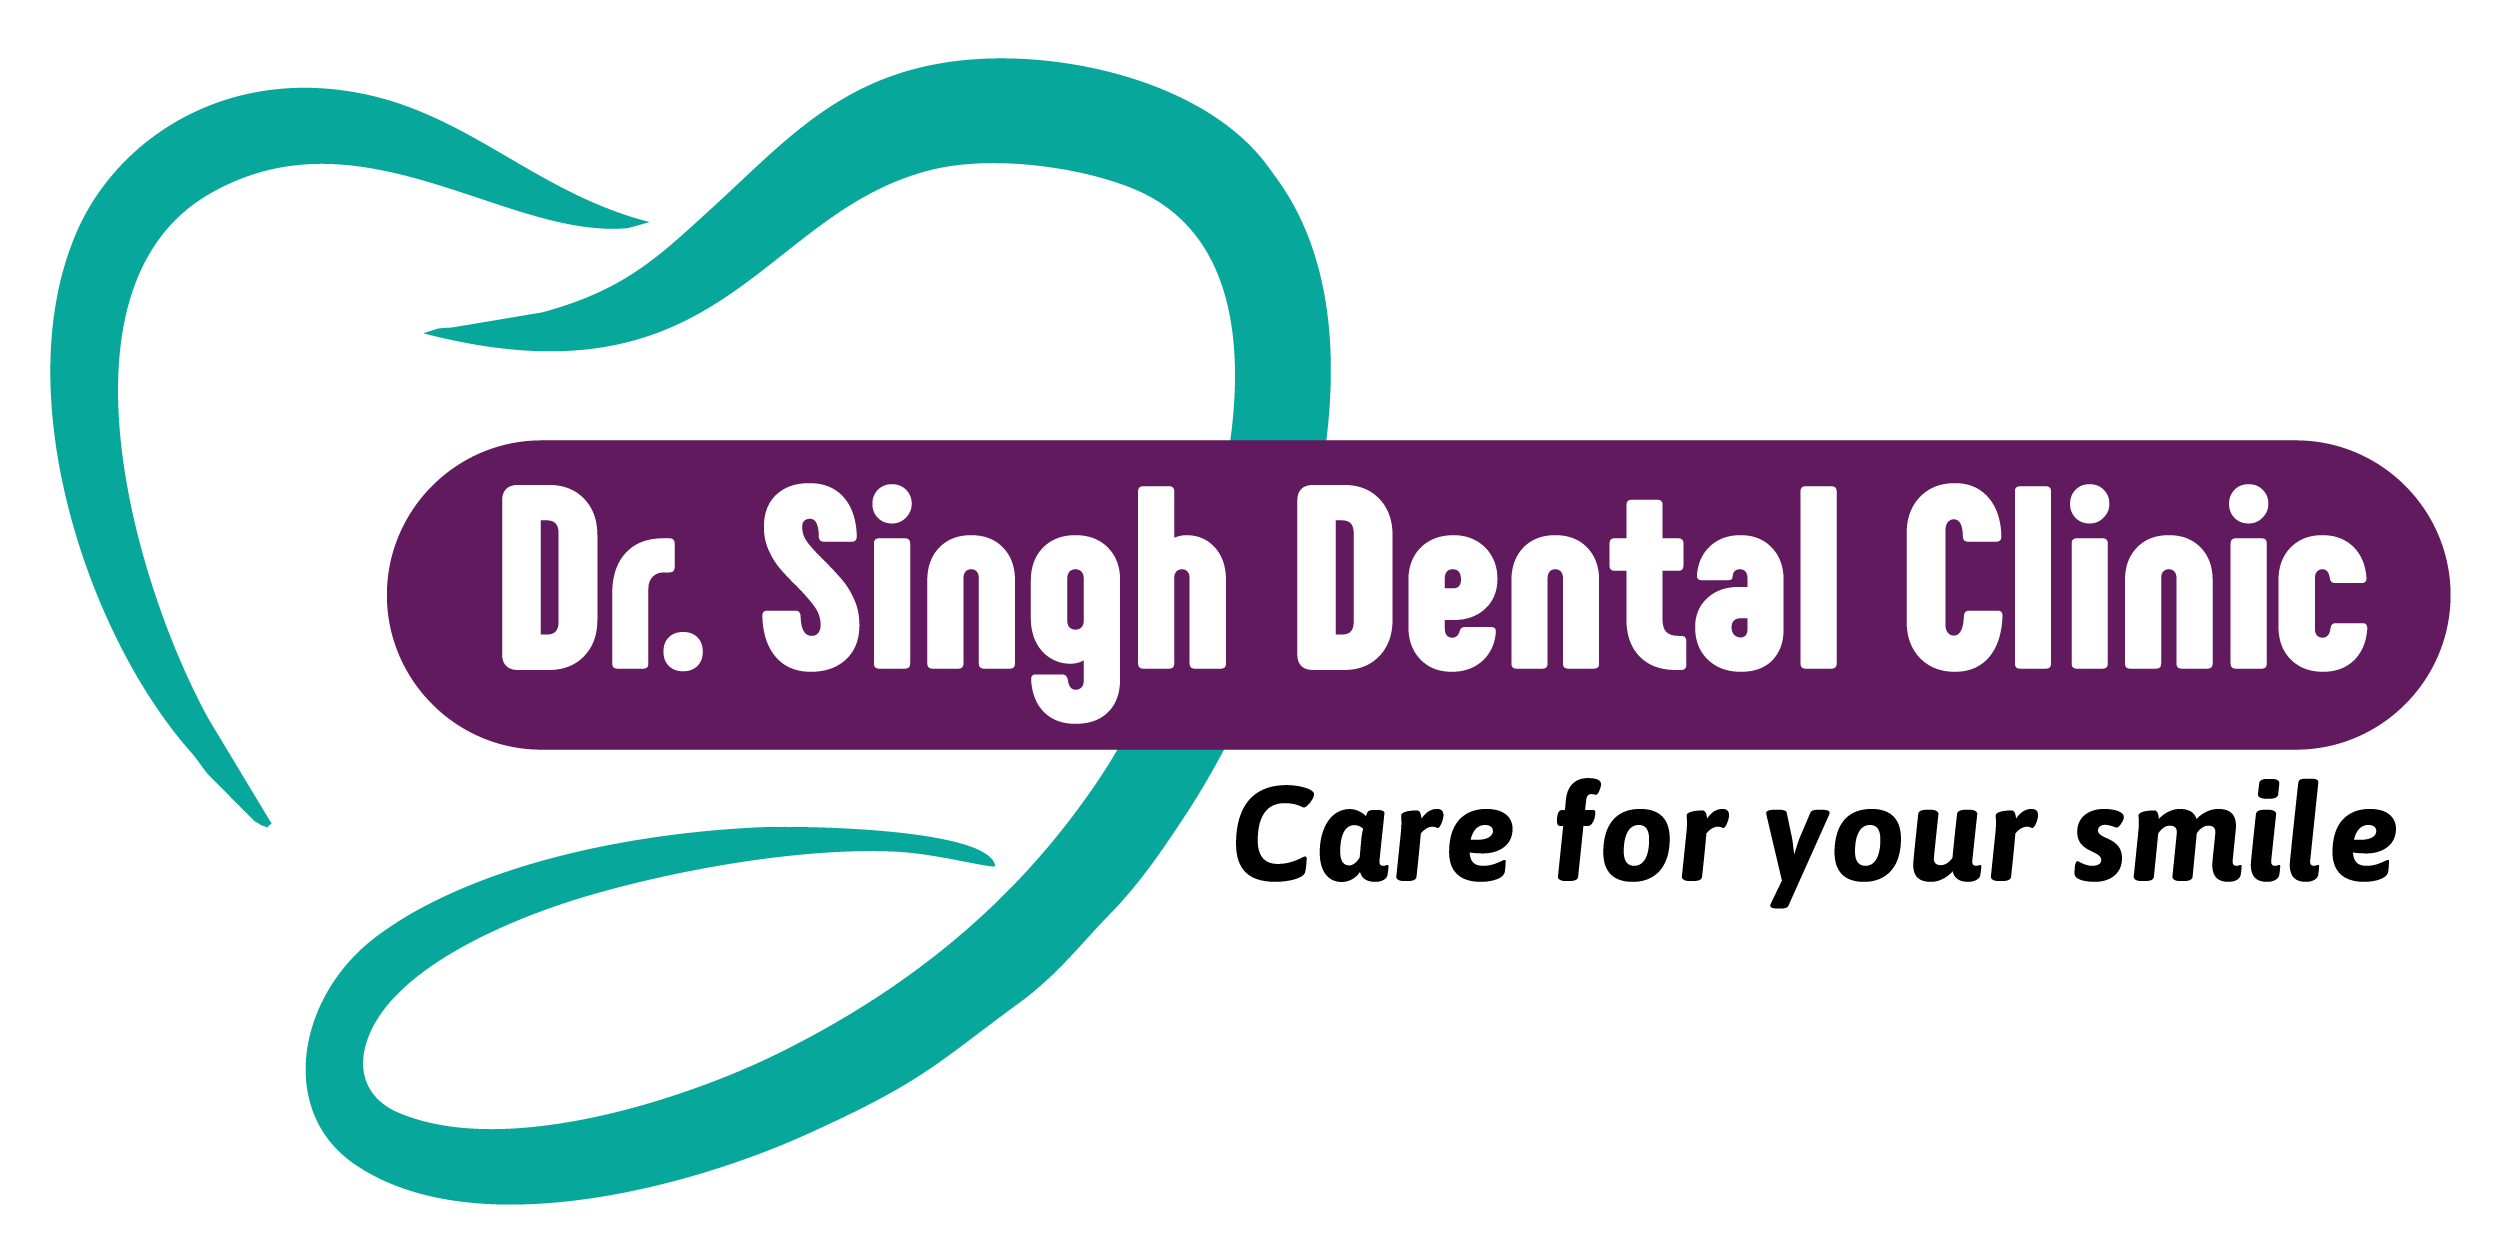 Welcome To Dr. Singh Dental Clinic